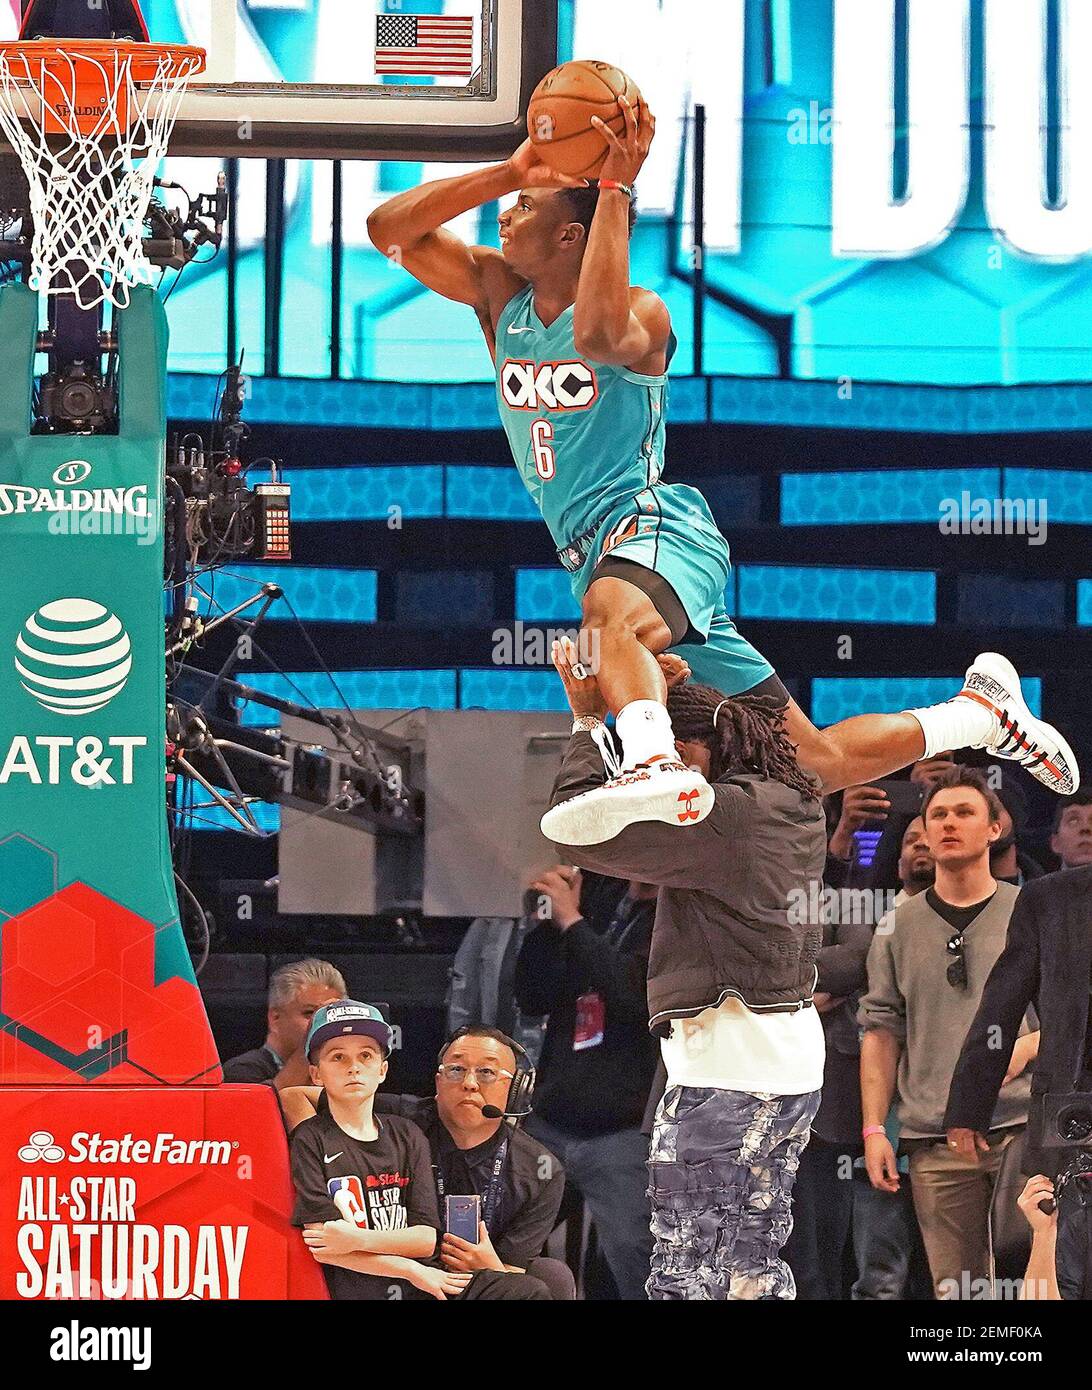 Hamidou Diallo of the Oklahoma City Thunder leaps over rapper Quavo to  secure the win in the AT&T Slam Dunk contest during the All-Star Saturday  Night festivities at Spectrum Center in Charlotte